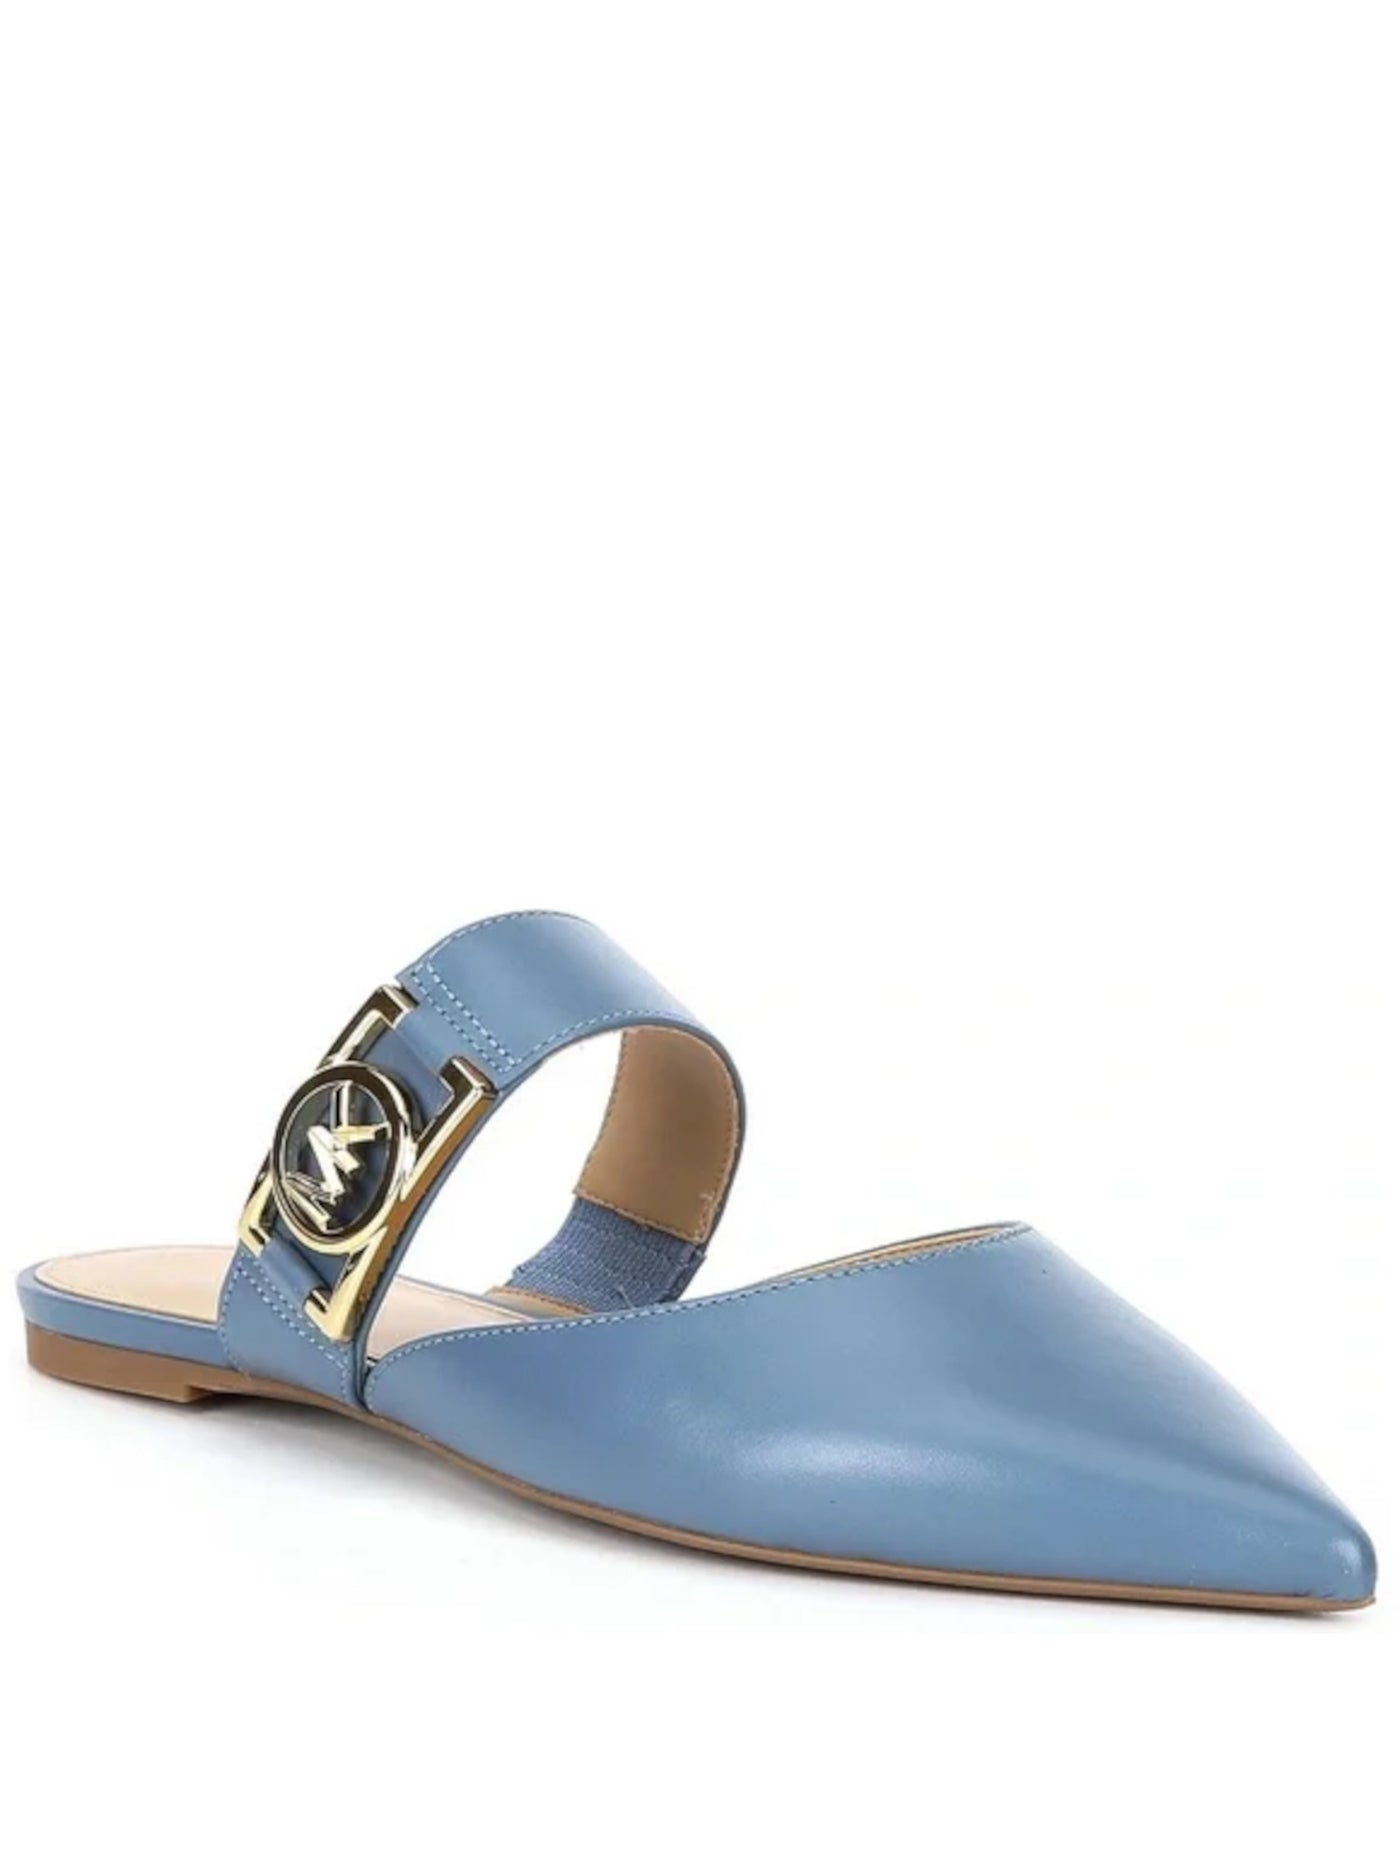 MICHAEL KORS Womens Blue Logo Padded Stretch April Pointed Toe Slip On Leather Flats Shoes 5